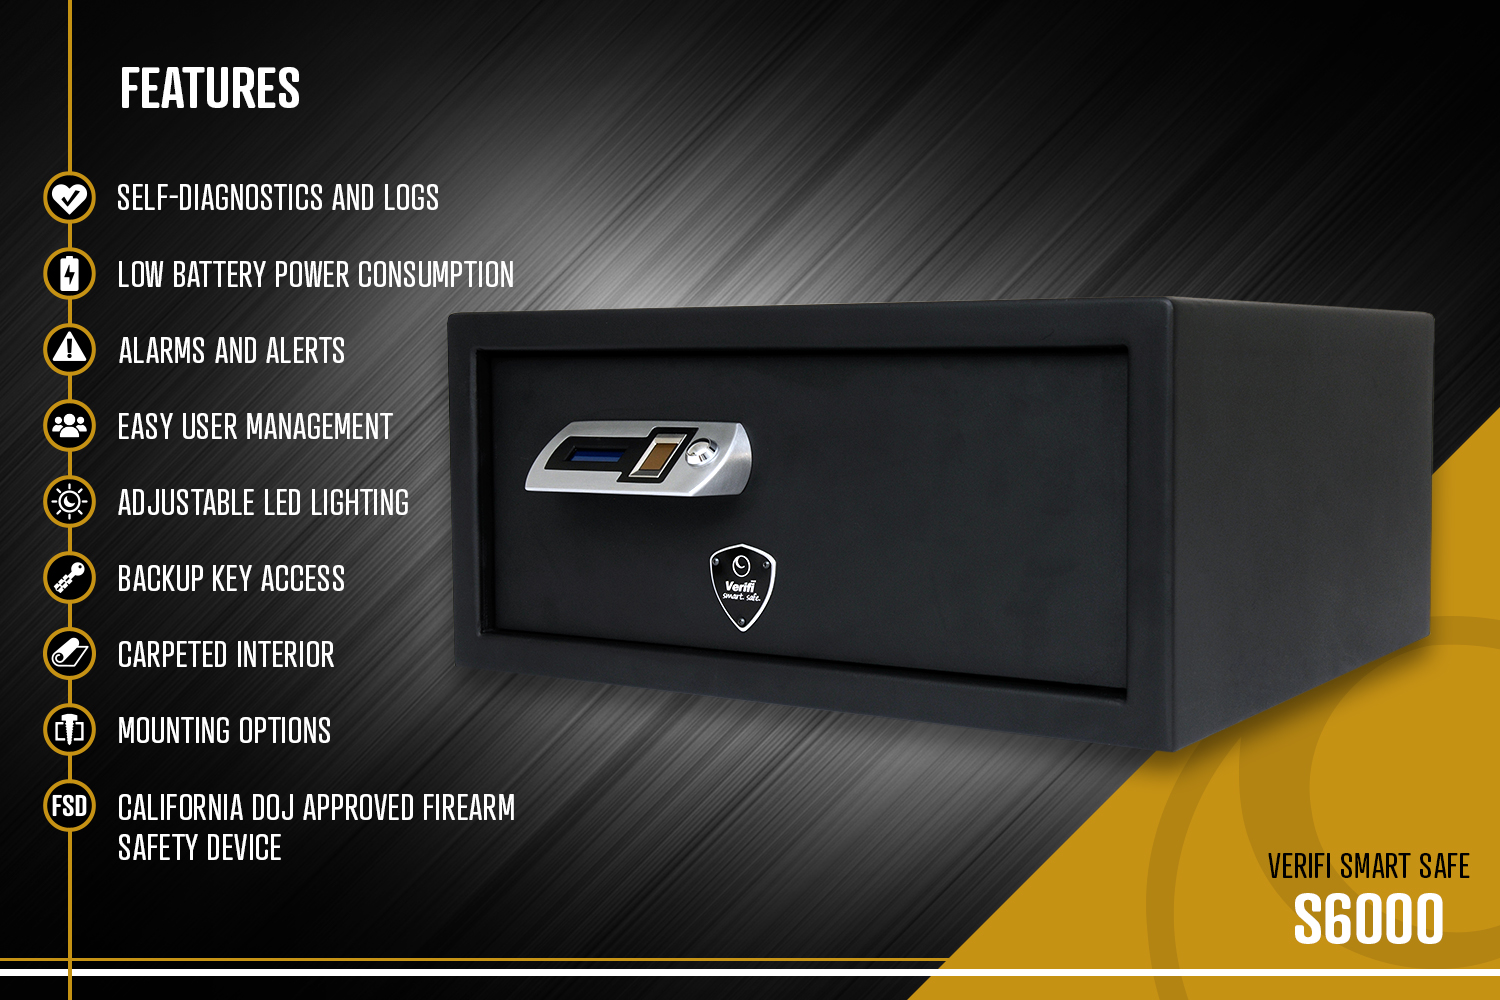 slide 3 of 8, show larger image, left side angle view of the verifi smart safe s6000 with a list of features.